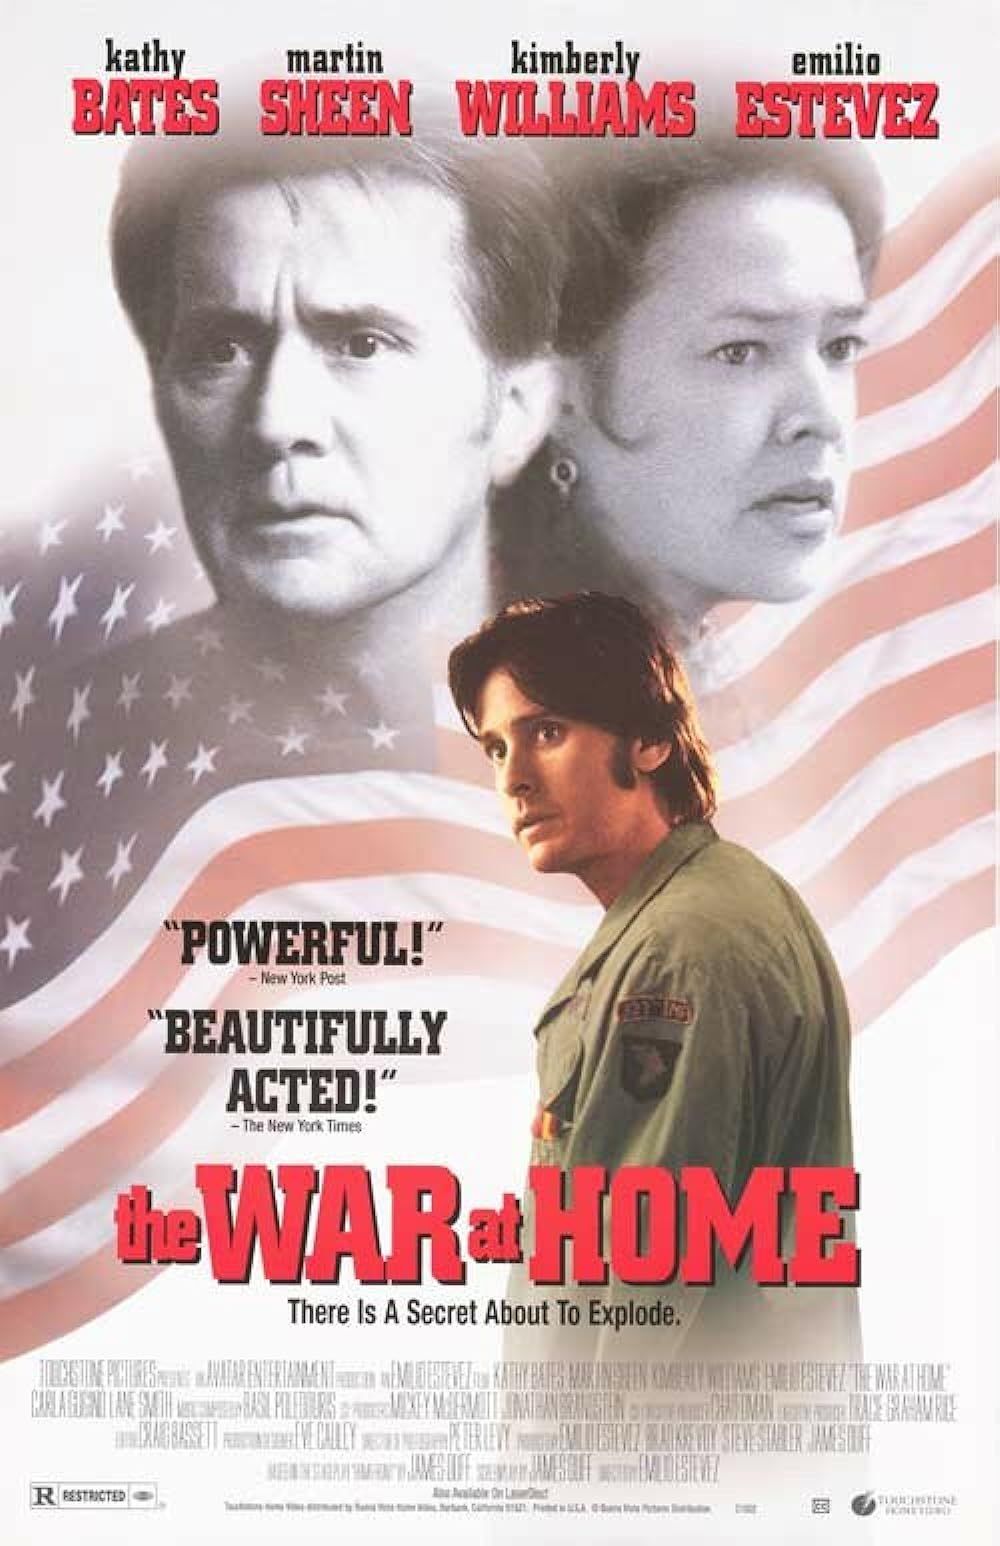 The War at Home poster